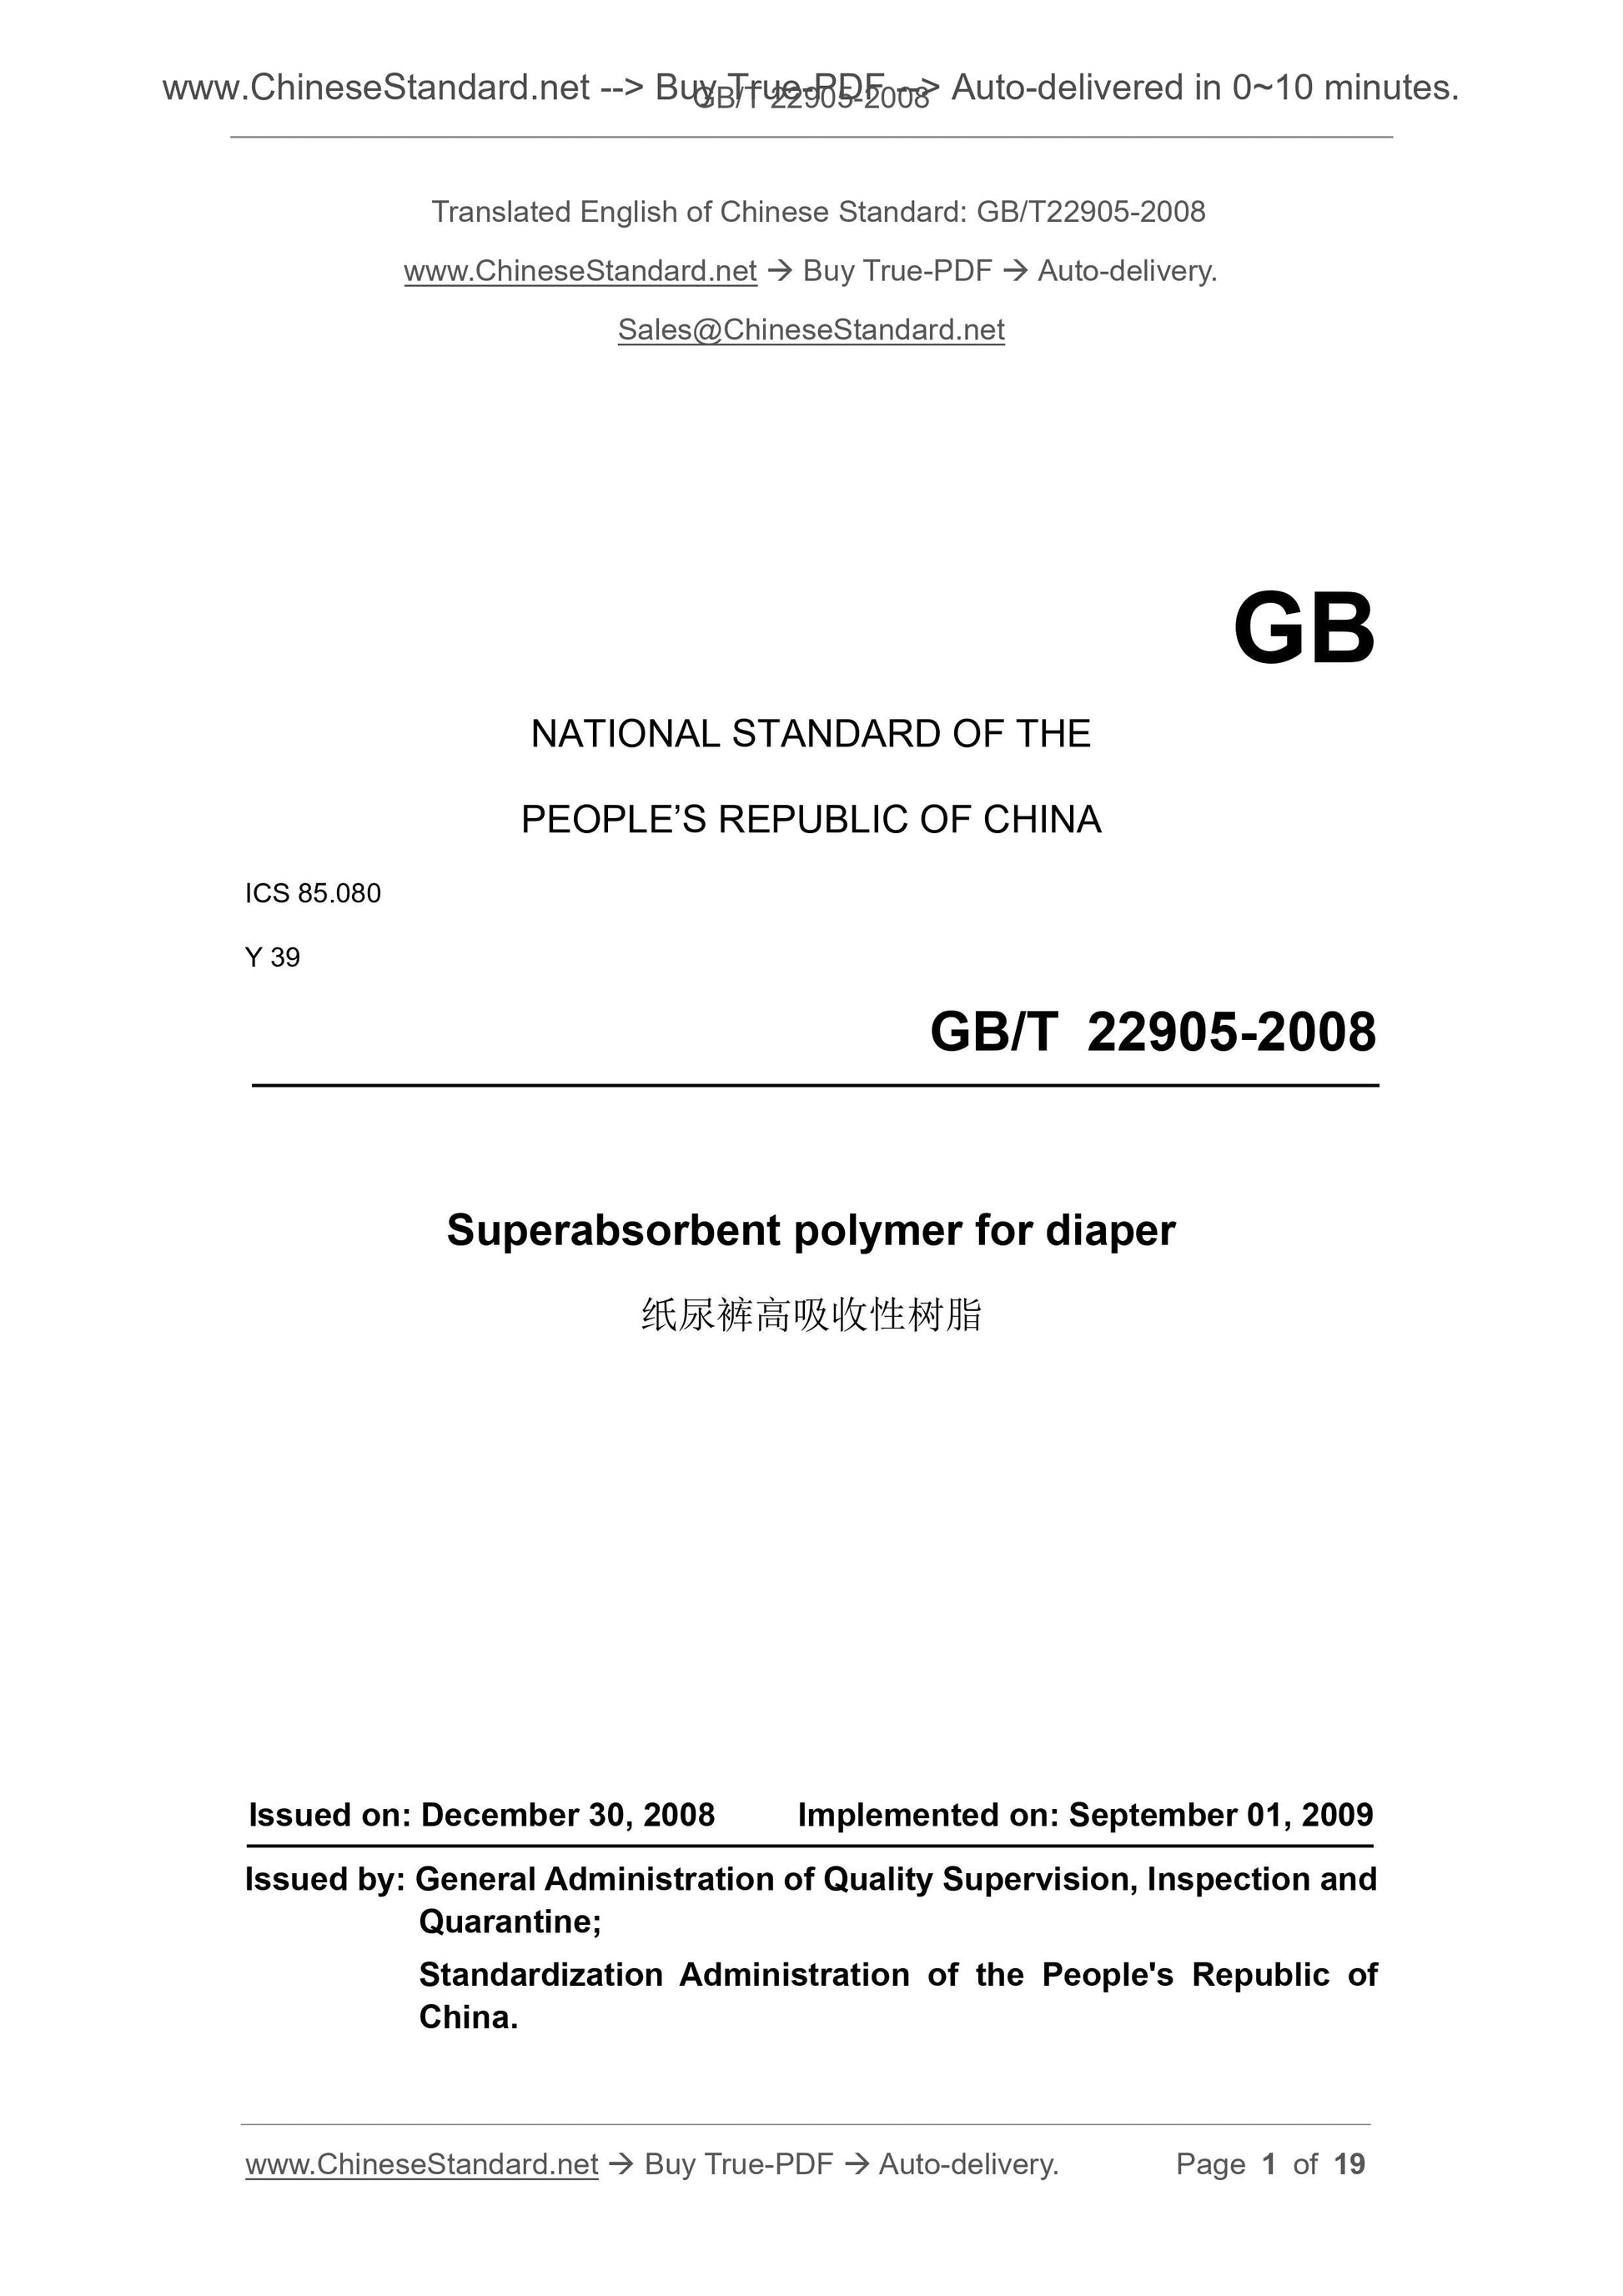 GB/T 22905-2008 Page 1